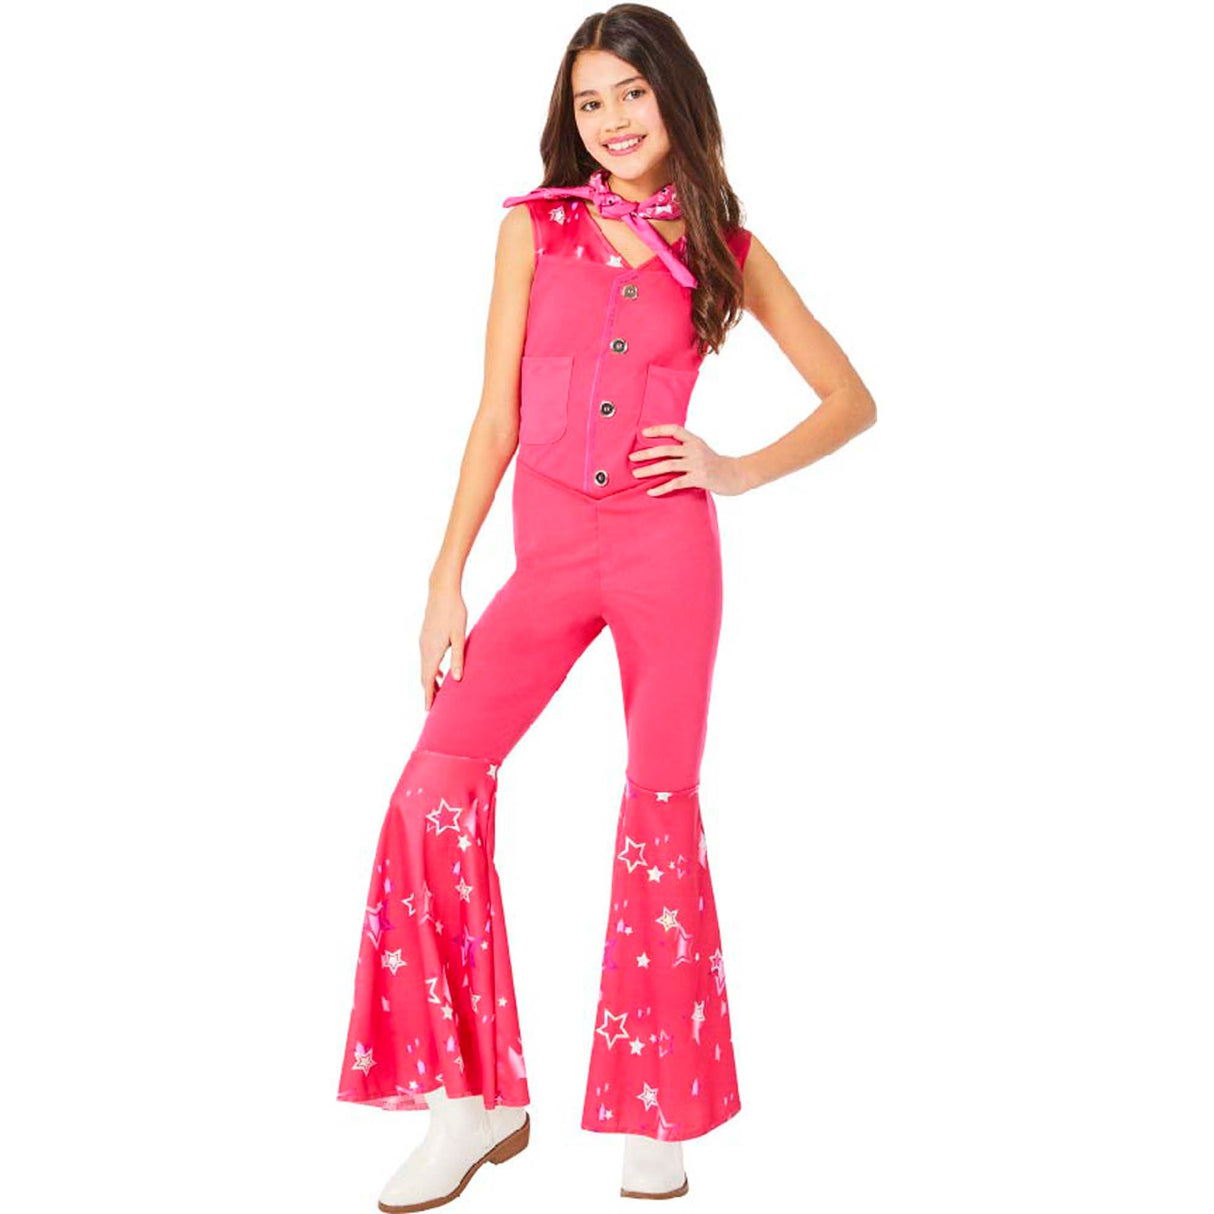 IN SPIRIT DESIGNS Costumes Barbie Cowgirl Costume for Kids, Pink Jumpsuit and Bandana